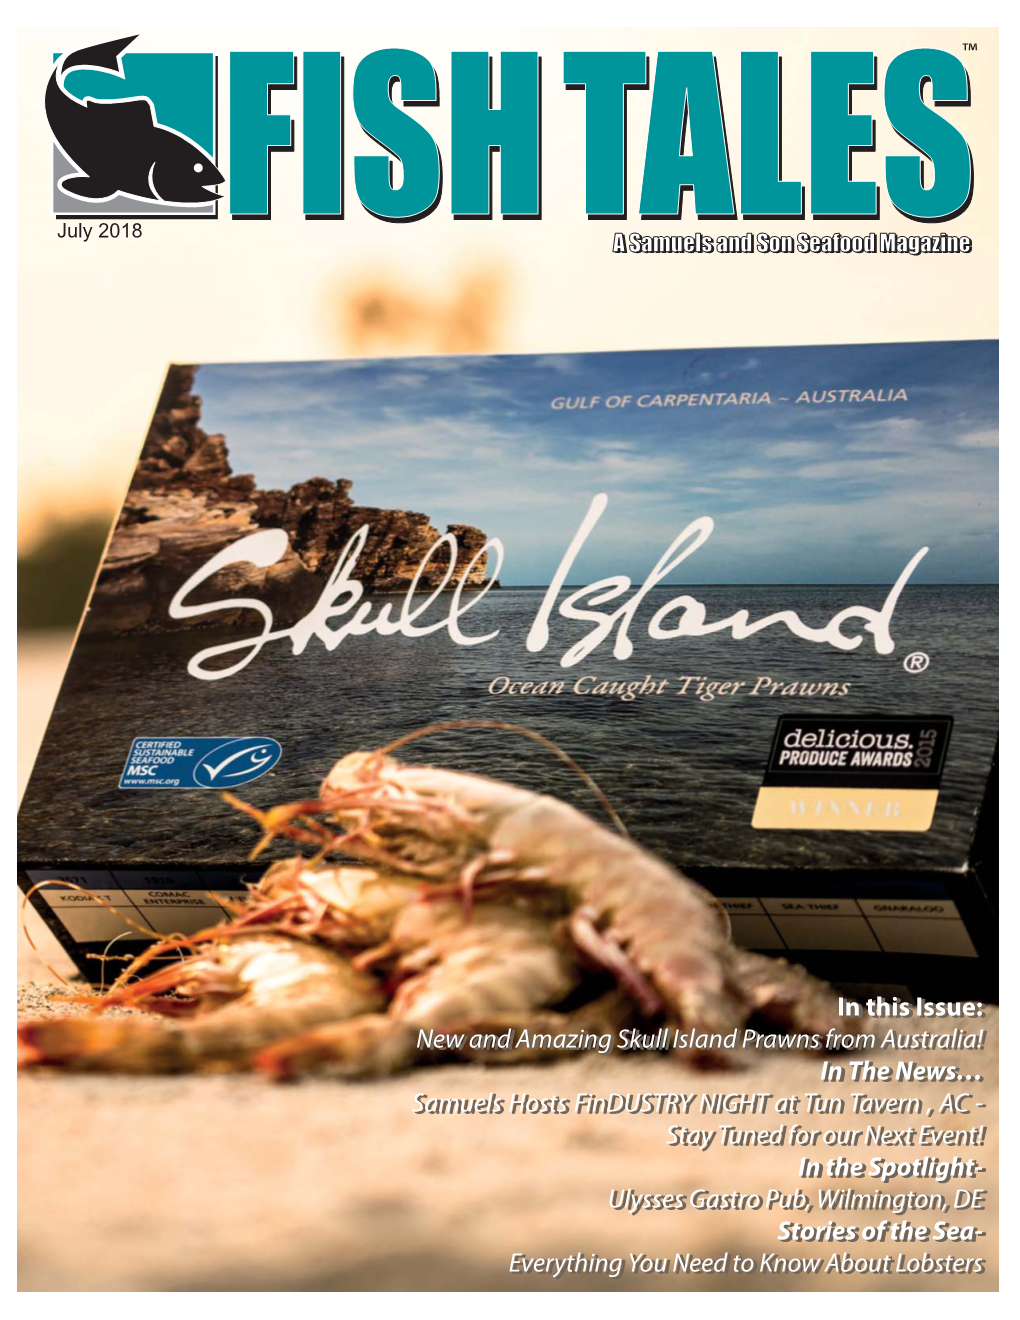 In This Issue: New and Amazing Skull Island Prawns